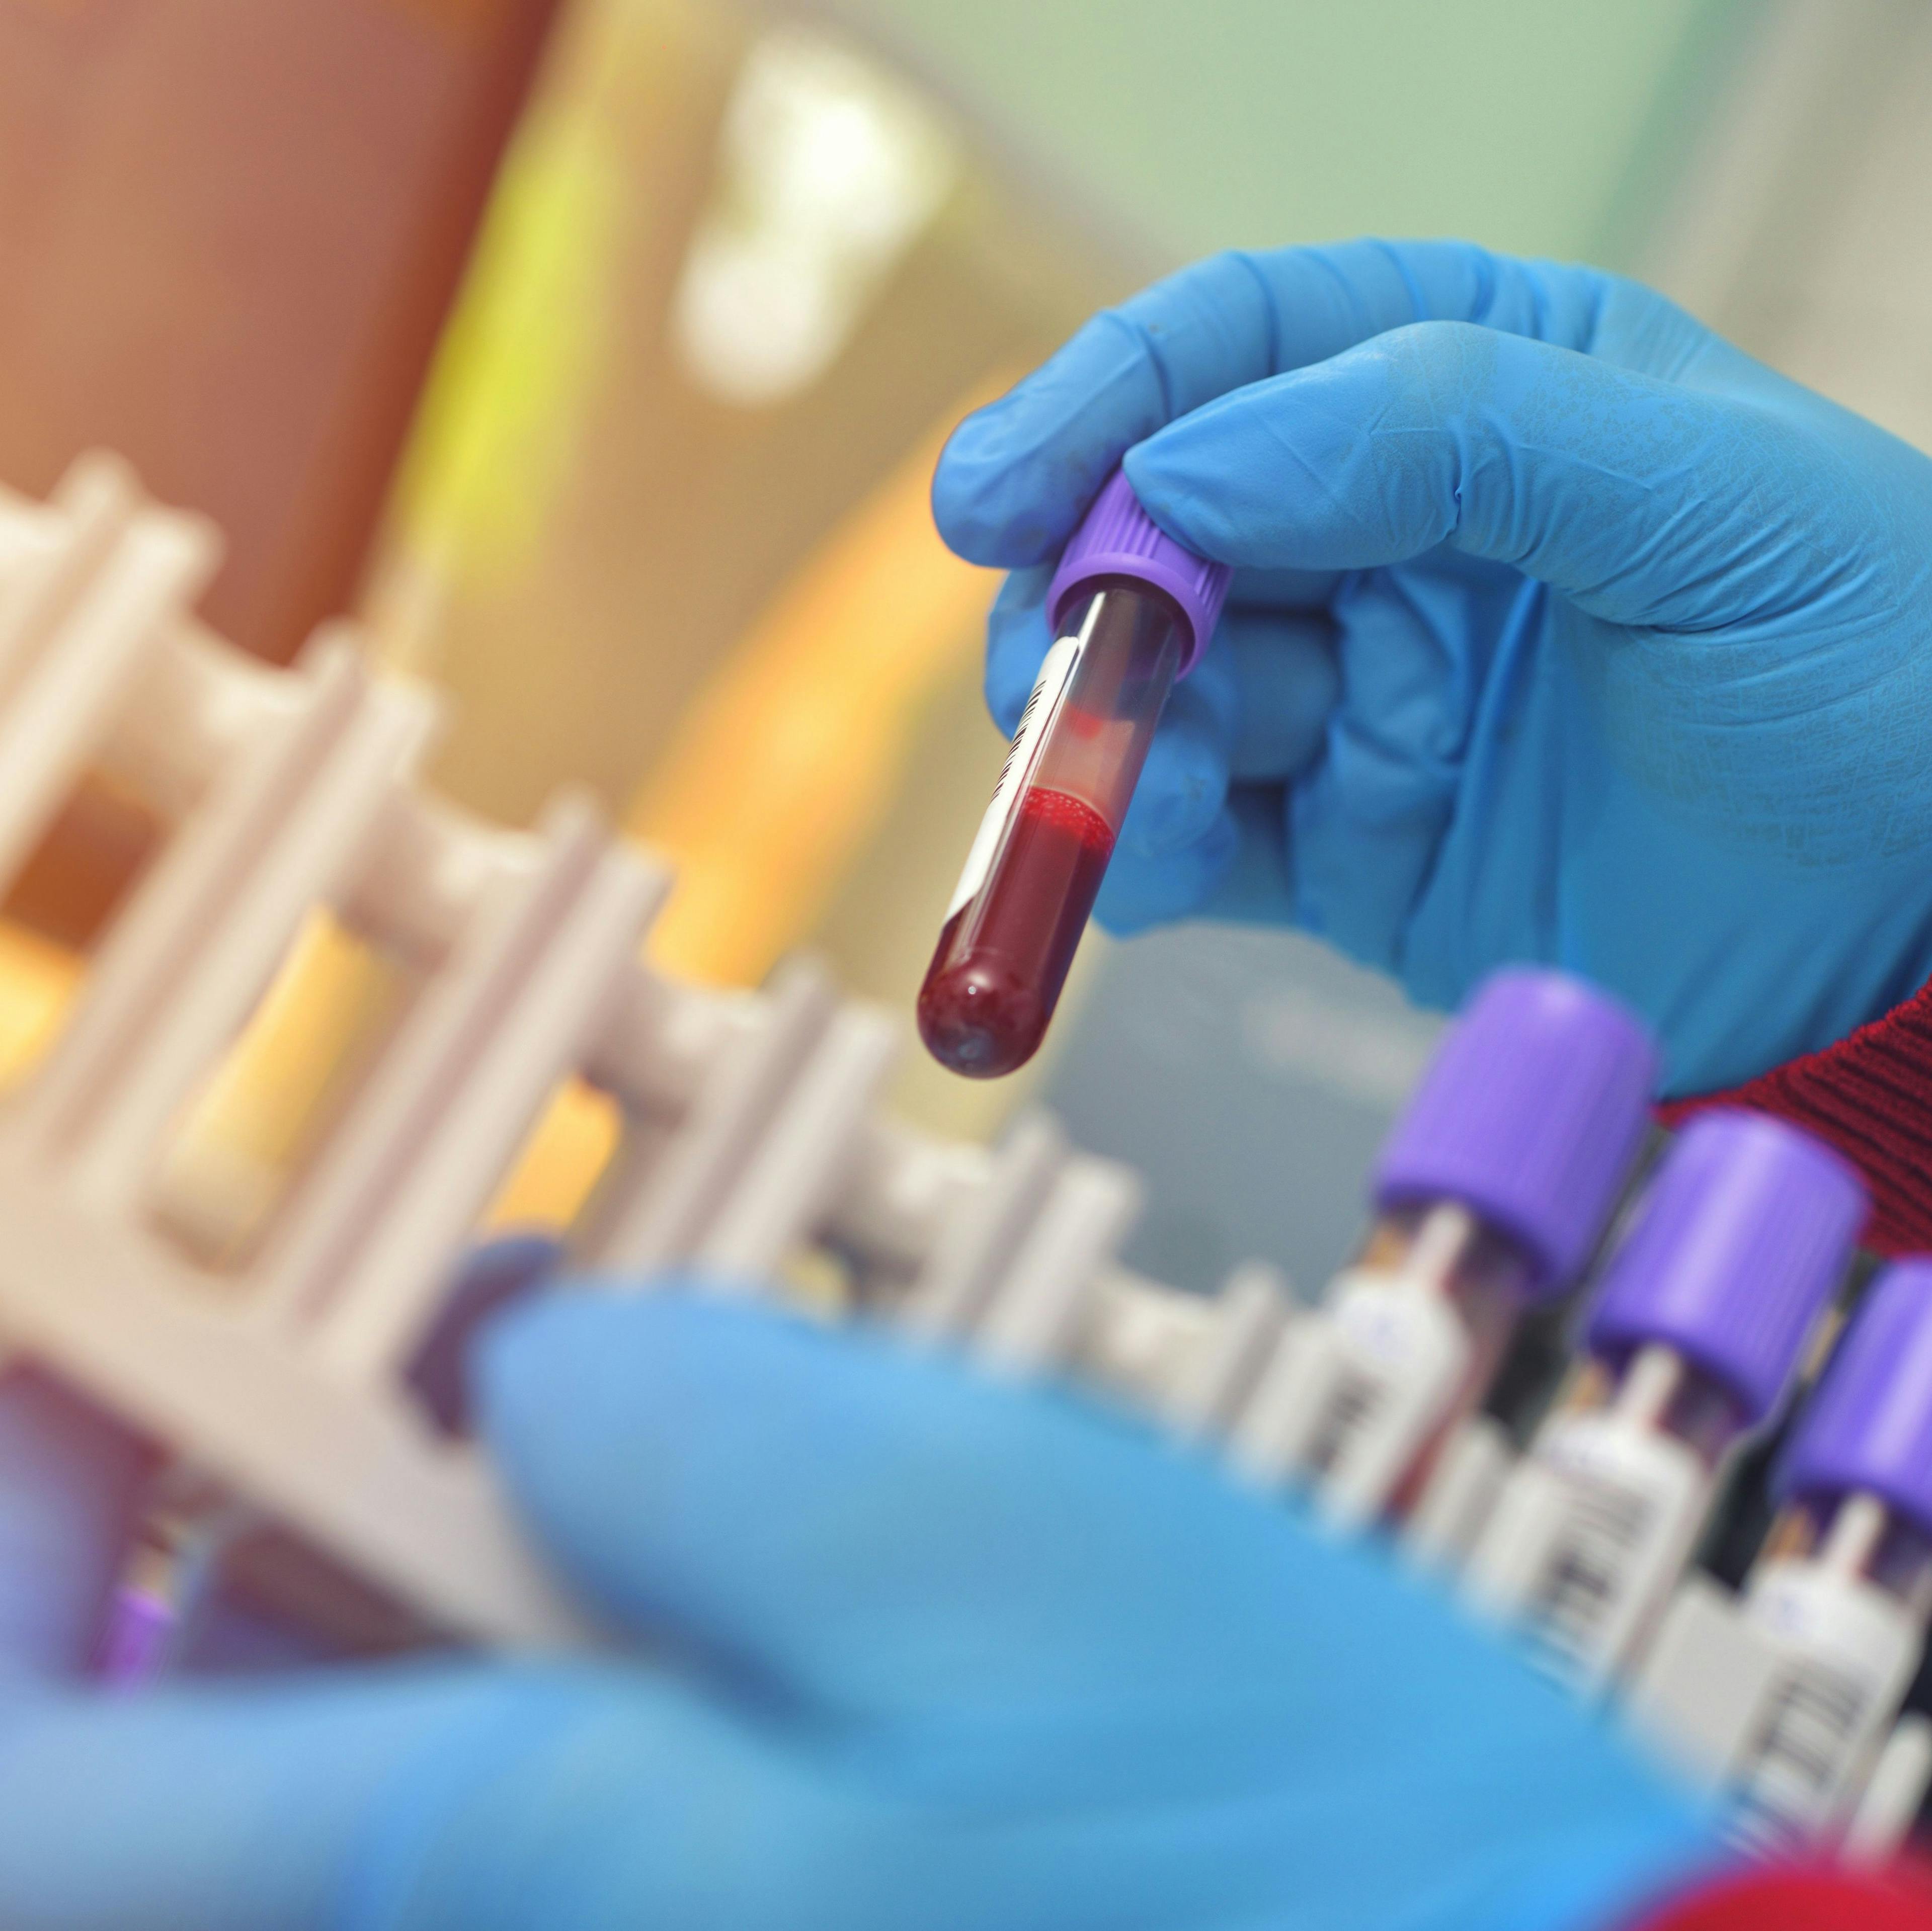 Knowledge of Severity, Susceptibility Shape Perceptions of Sickle Cell Trait Testing